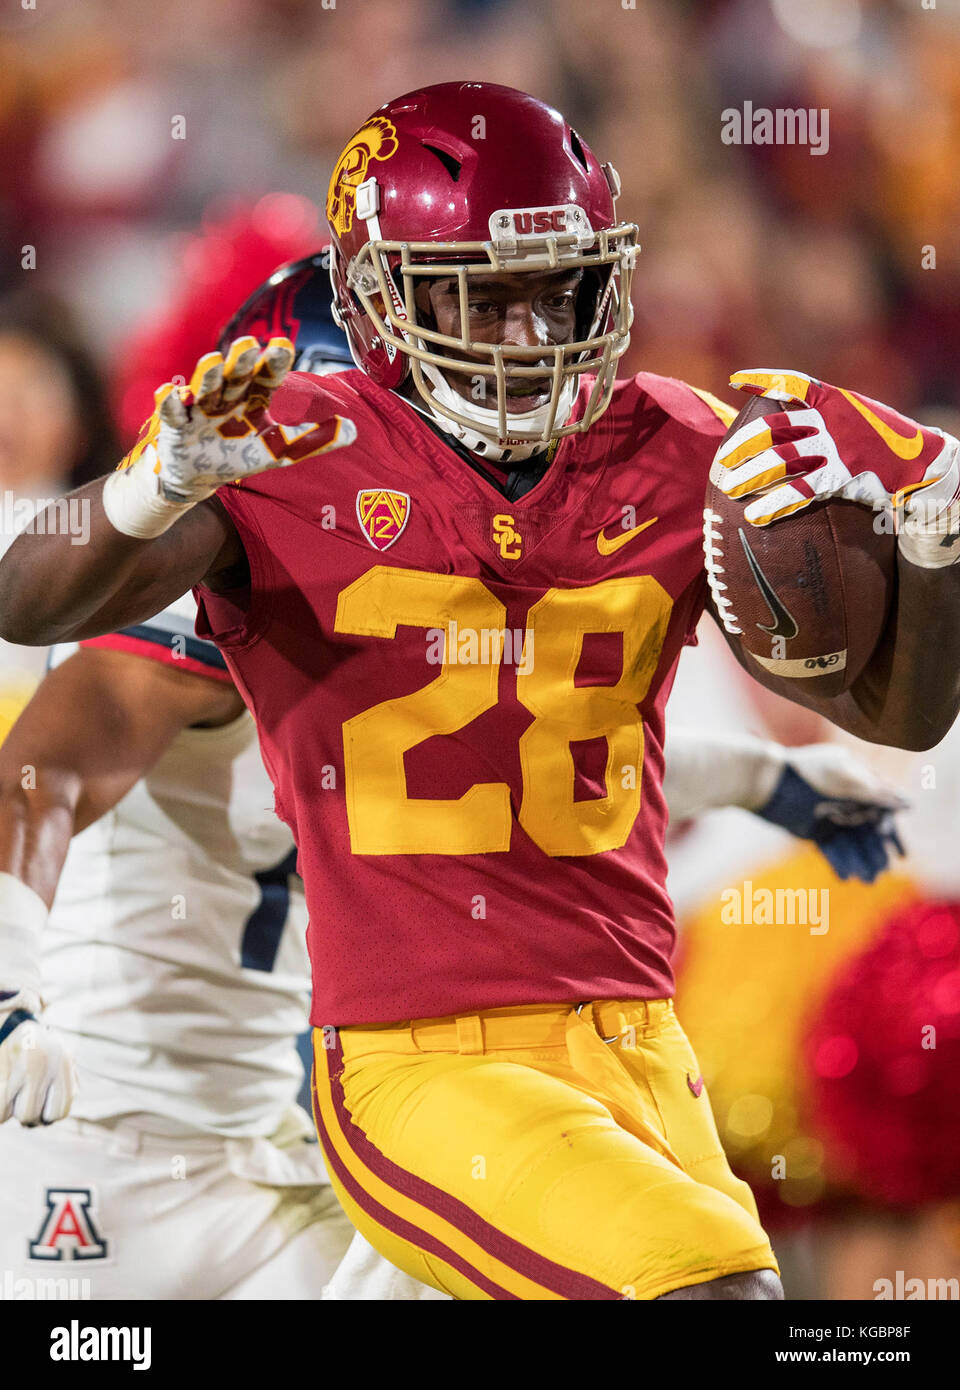 Los Angeles, CA, USA. 04th Nov, 2017. USC running back (28) Aca'Cedric Ware breaks a tackle and turns the corner, on his way to score a touchdown during a game between the Arizona Wildcats vs USC Trojans on Saturday, November 4, 2017 at the Los Angeles Memorial Coliseum in Los Angeles, California. USC defeated Arizona 49-35. (Mandatory Credit: Juan Lainez/MarinMedia.org/Cal Sport Media) (Complete photographer, and credit required) Credit: csm/Alamy Live News Stock Photo